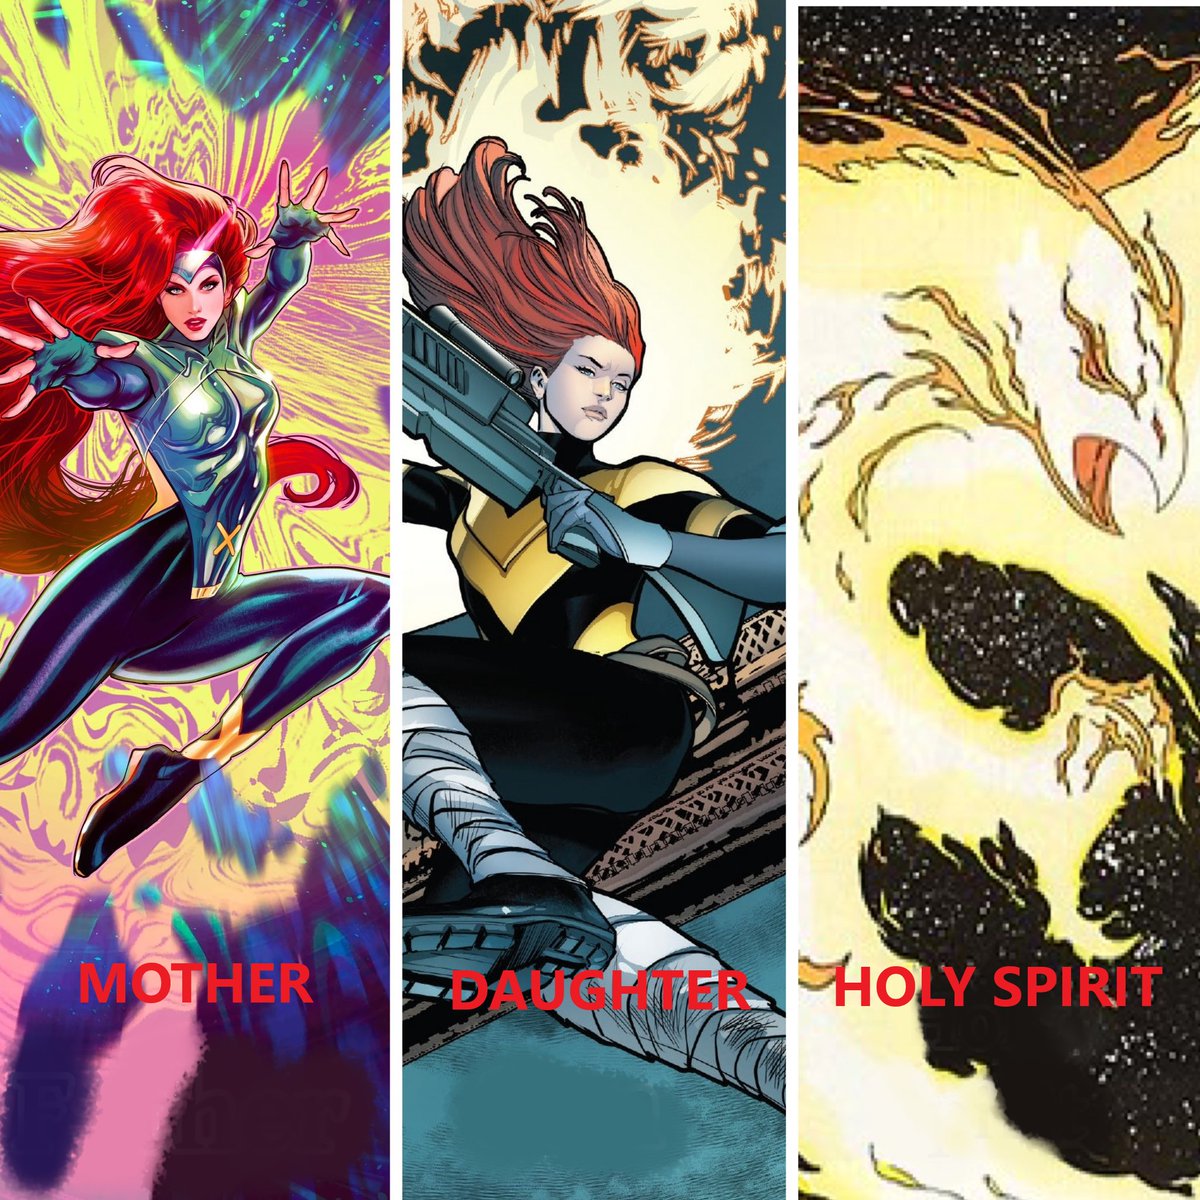 Jean Grey is the Mother, Hope Summers is the Daughter, and Phoenix is the Holy Spirit. This is how it should be done right. A lot of fake Jean Grey misgendering Jean Grey as father, and Hope as the son. I swear your Gender Studies are really showing when you misgender two